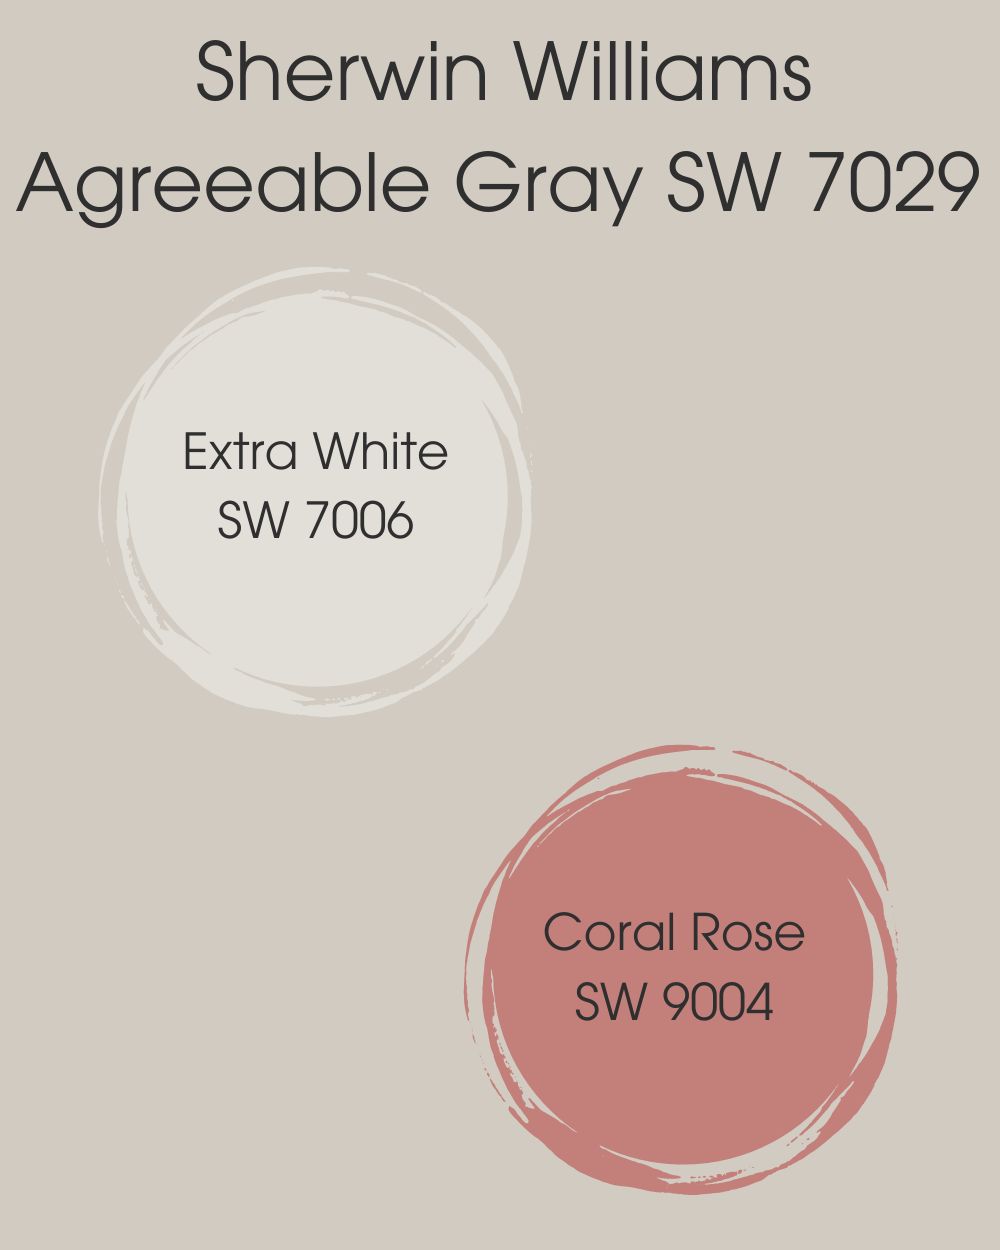 Agreeable Gray Color Palette